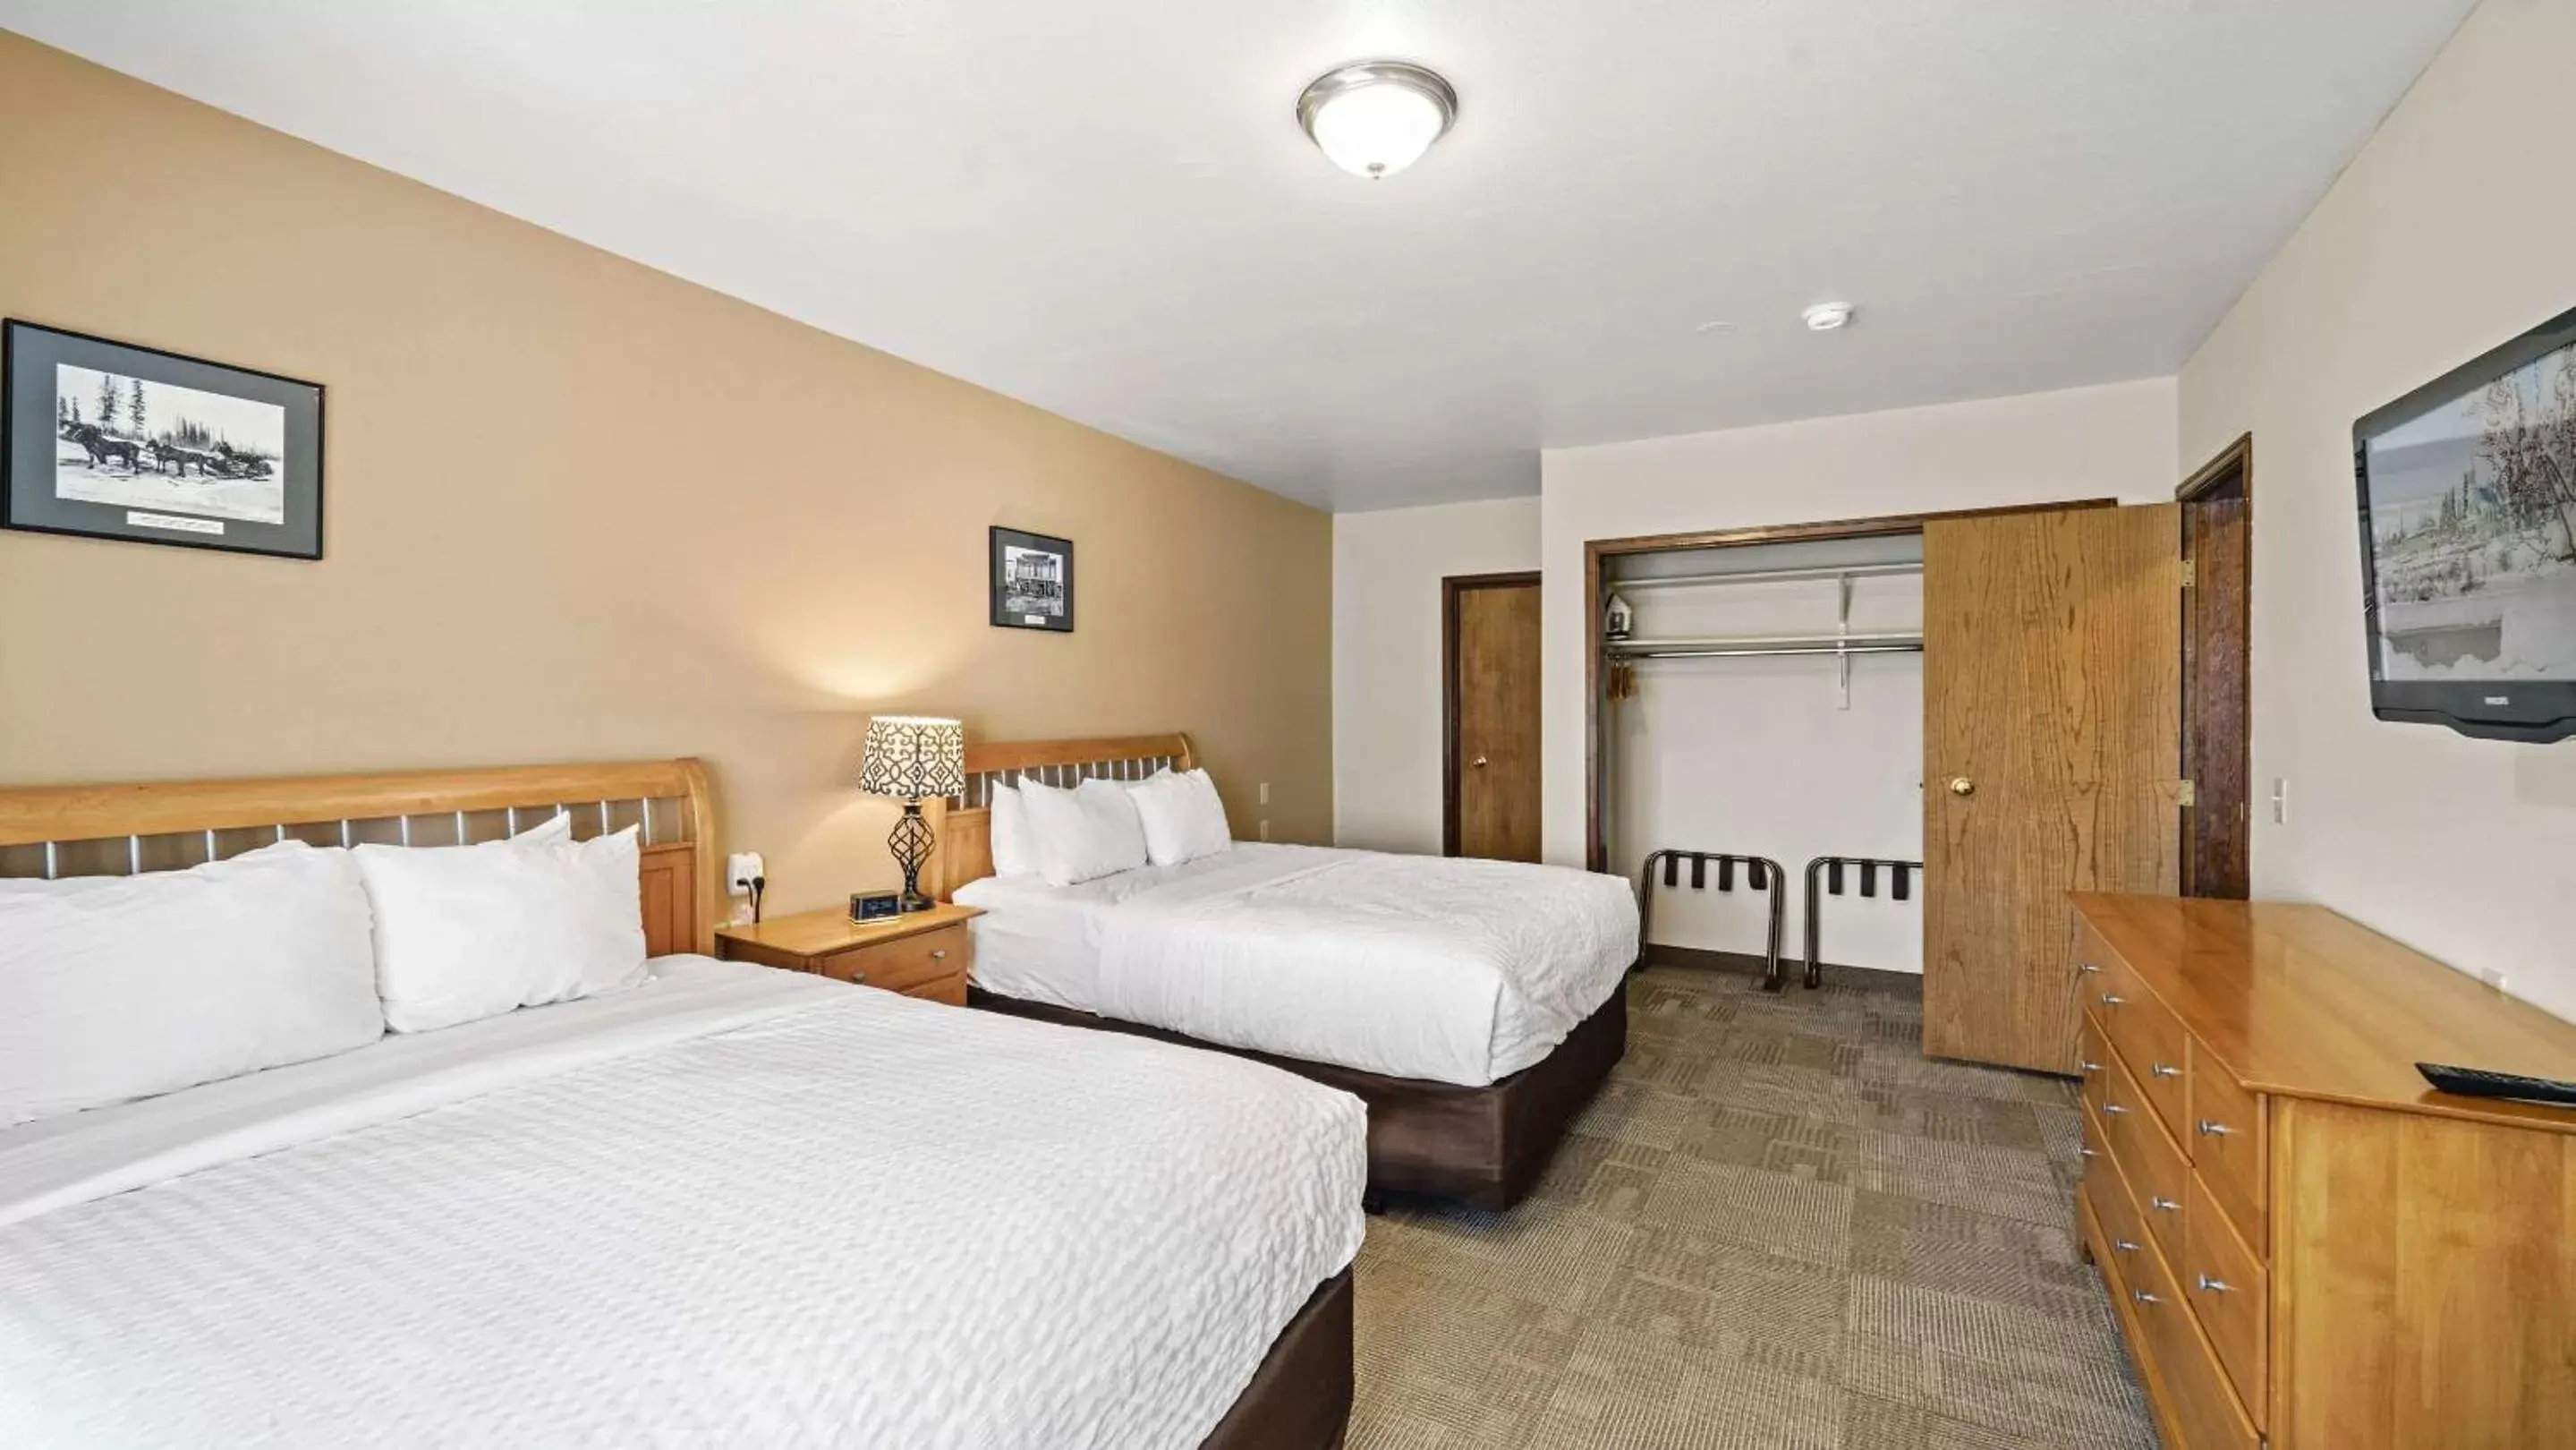 Bedroom in Clarion Hotel & Suites Fairbanks near Ft. Wainwright